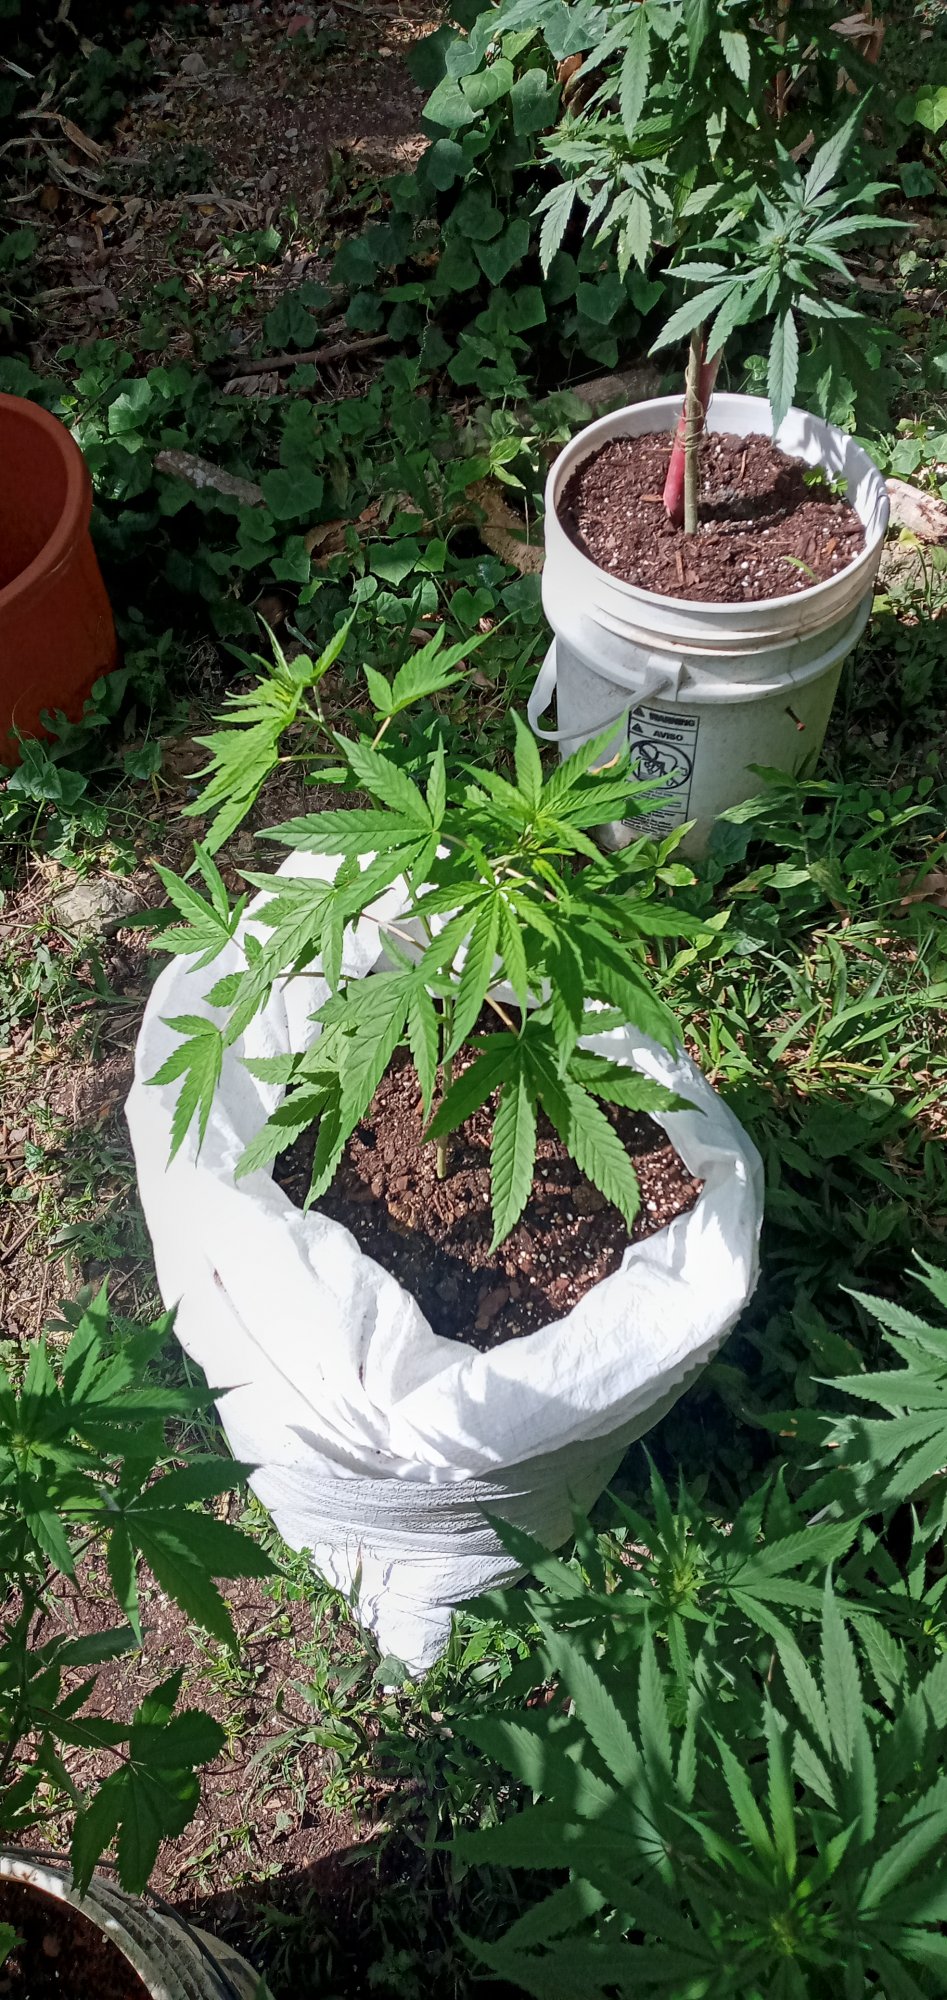 Outdoor skywalker how does she look